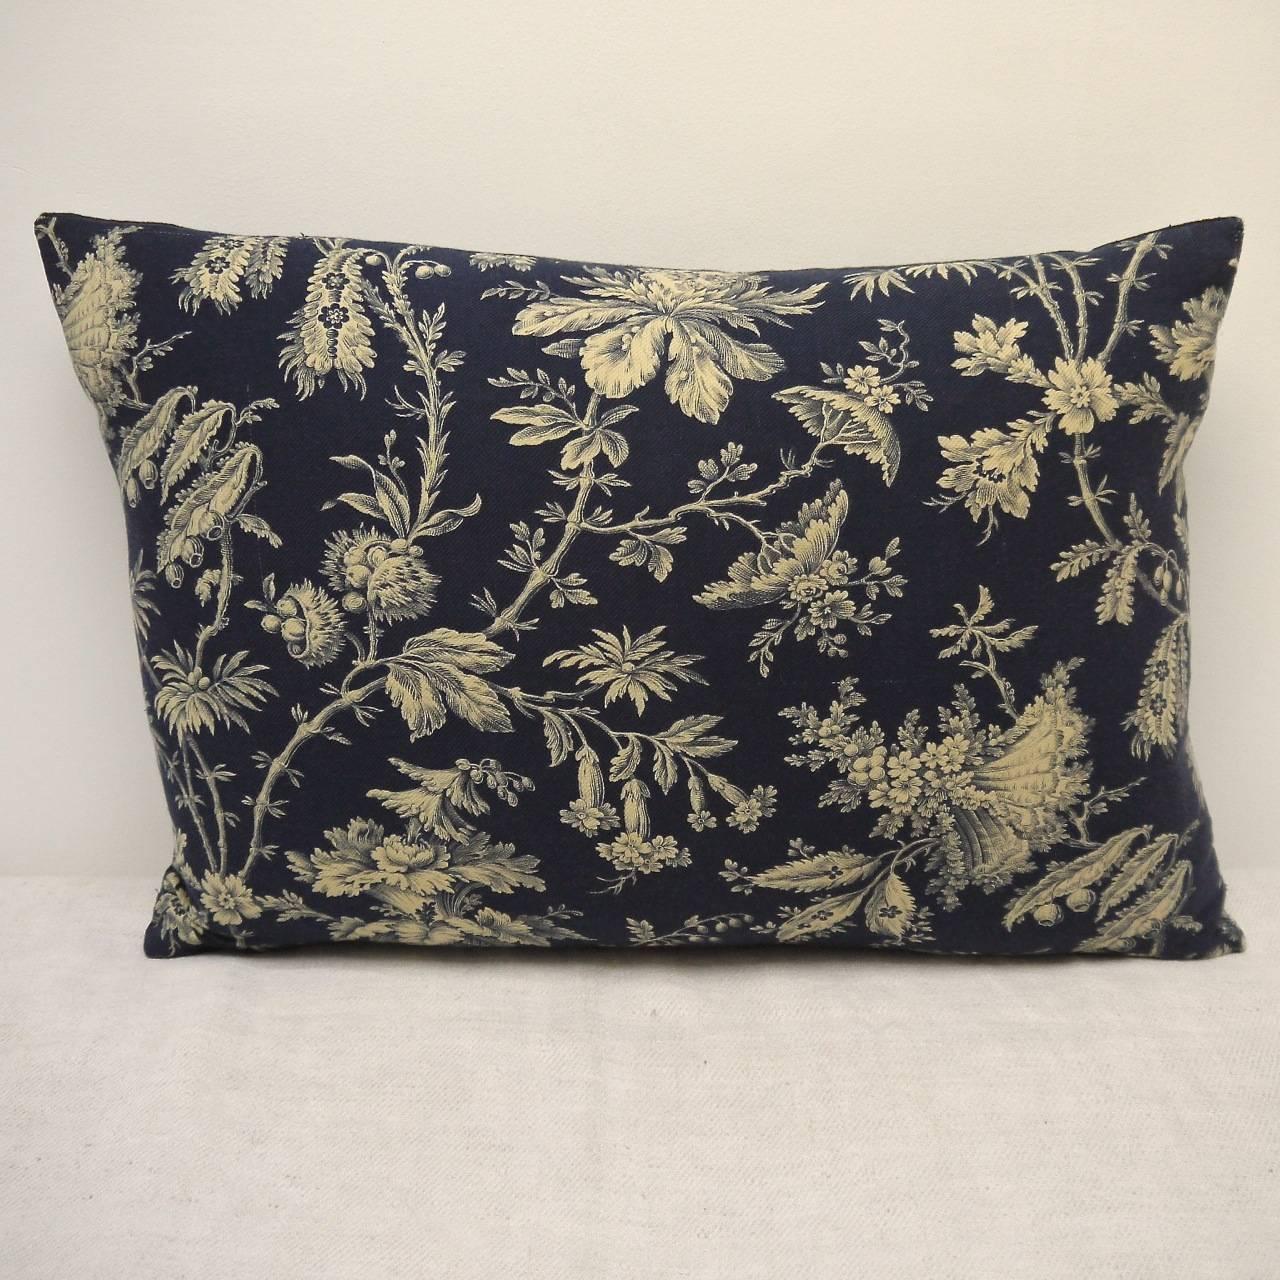 French printed cotton cushion, circa 1870s. A design of exotic flowers and meandering branches printed in cream on a inky blue textured cotton. Backed in a dyed blue/black linen and slipstitched closed with a duck feather pad insert.